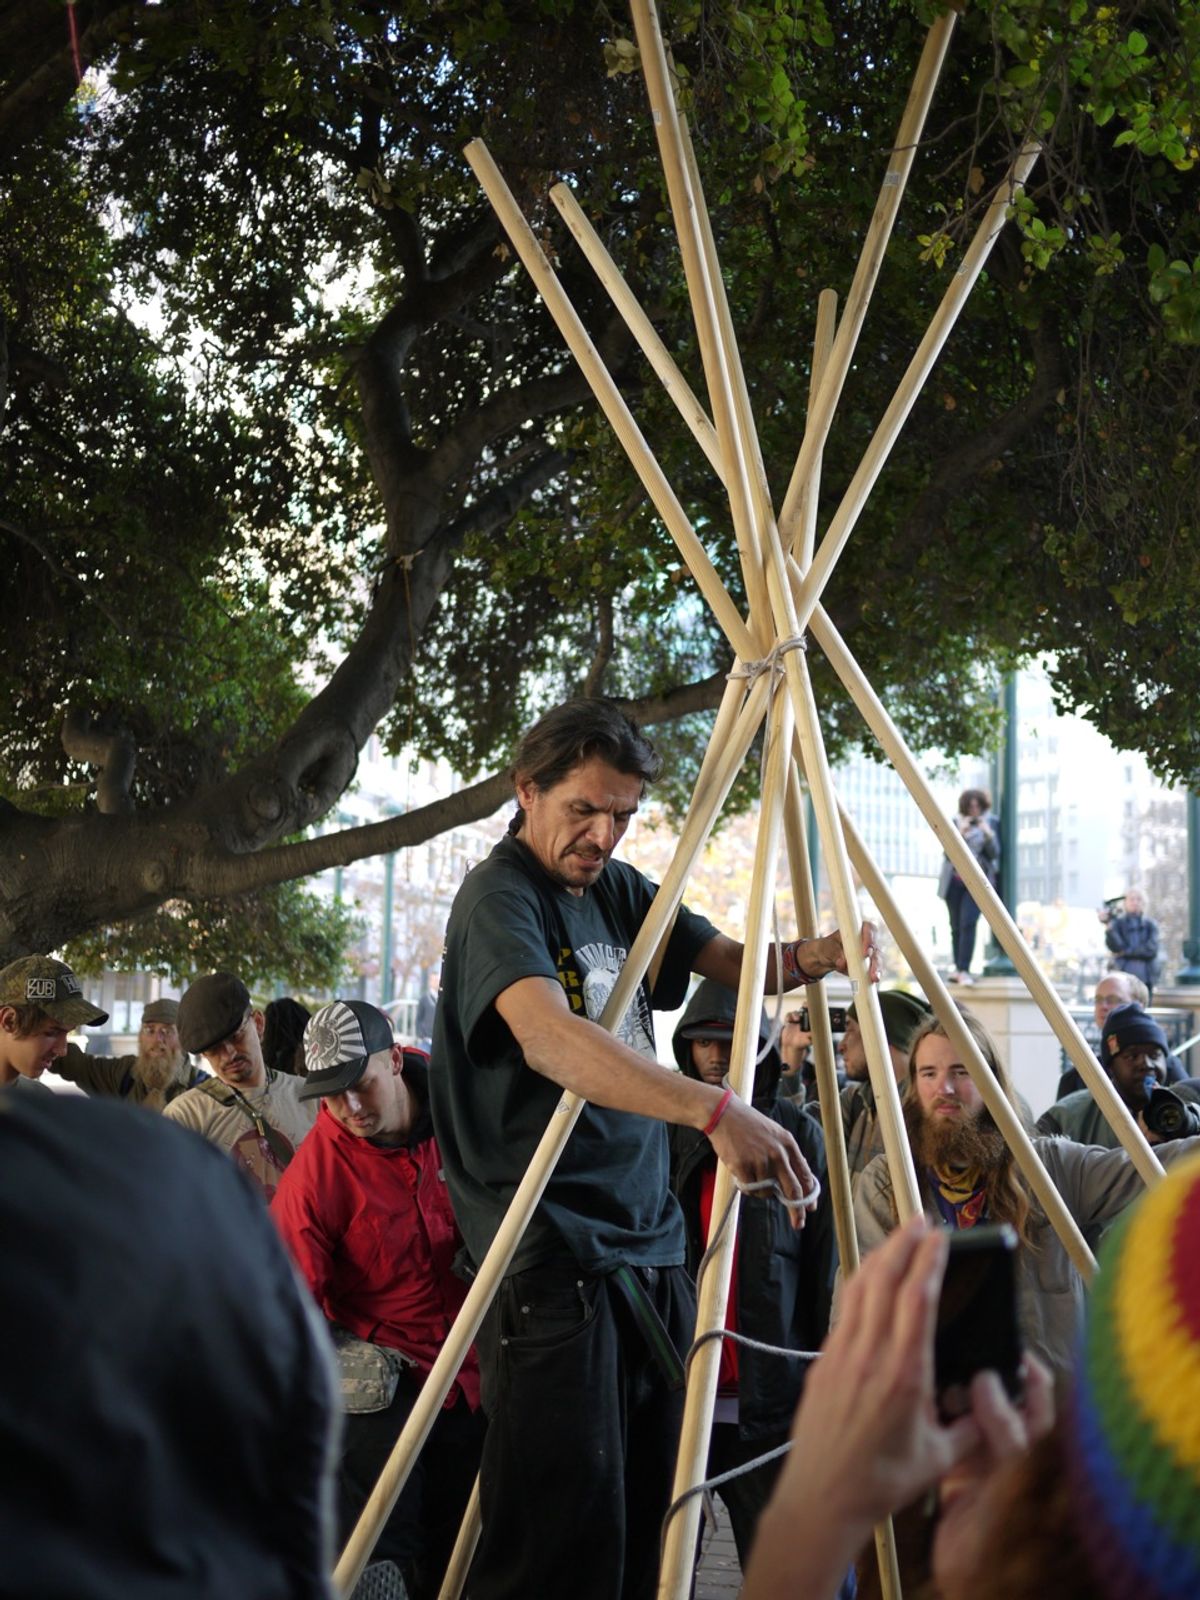  A teepee grows in Oakland     (Chris Colin)